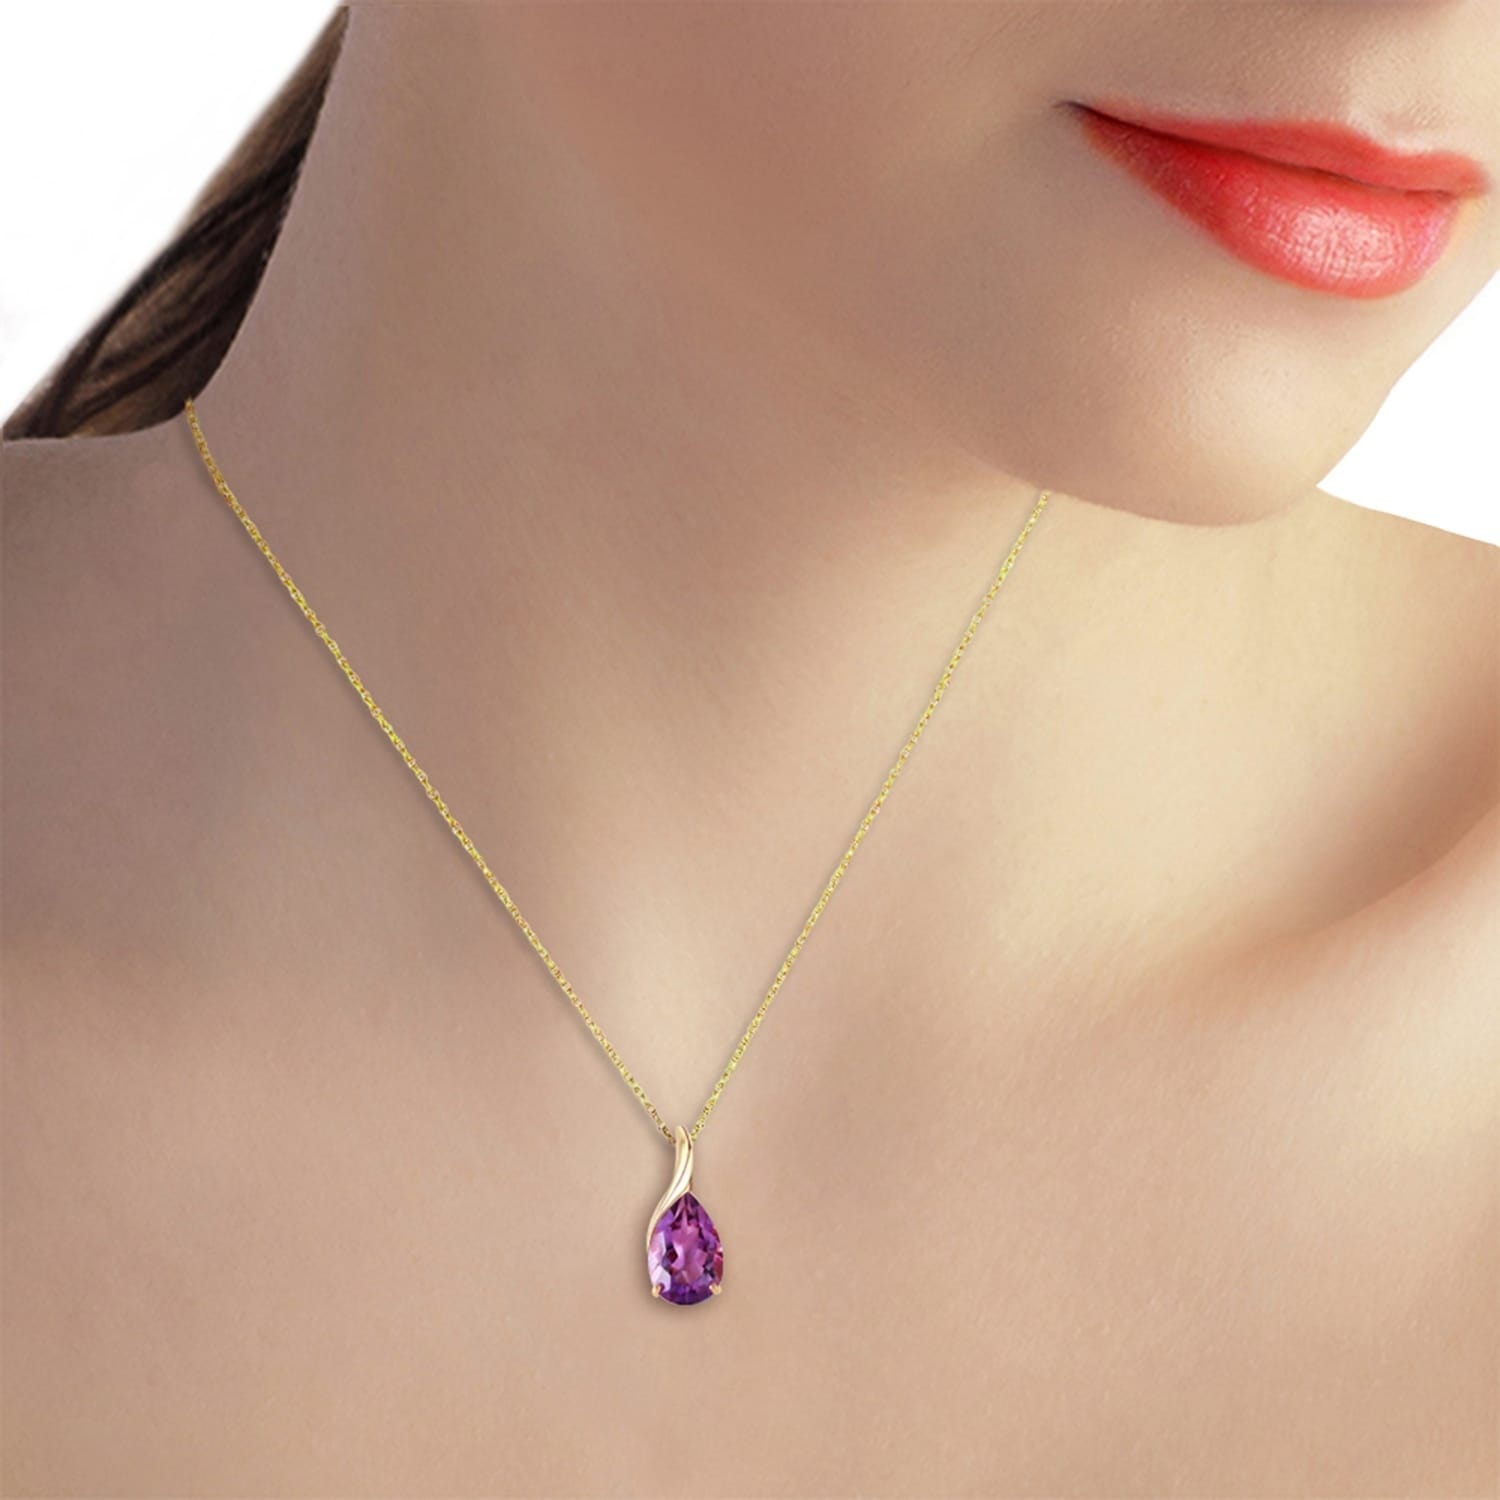 EXCLUSIVE OUTSTANDING 453.00 CTS 5 LINE PURPLE AMETHYST NECKLACE STRAND DG